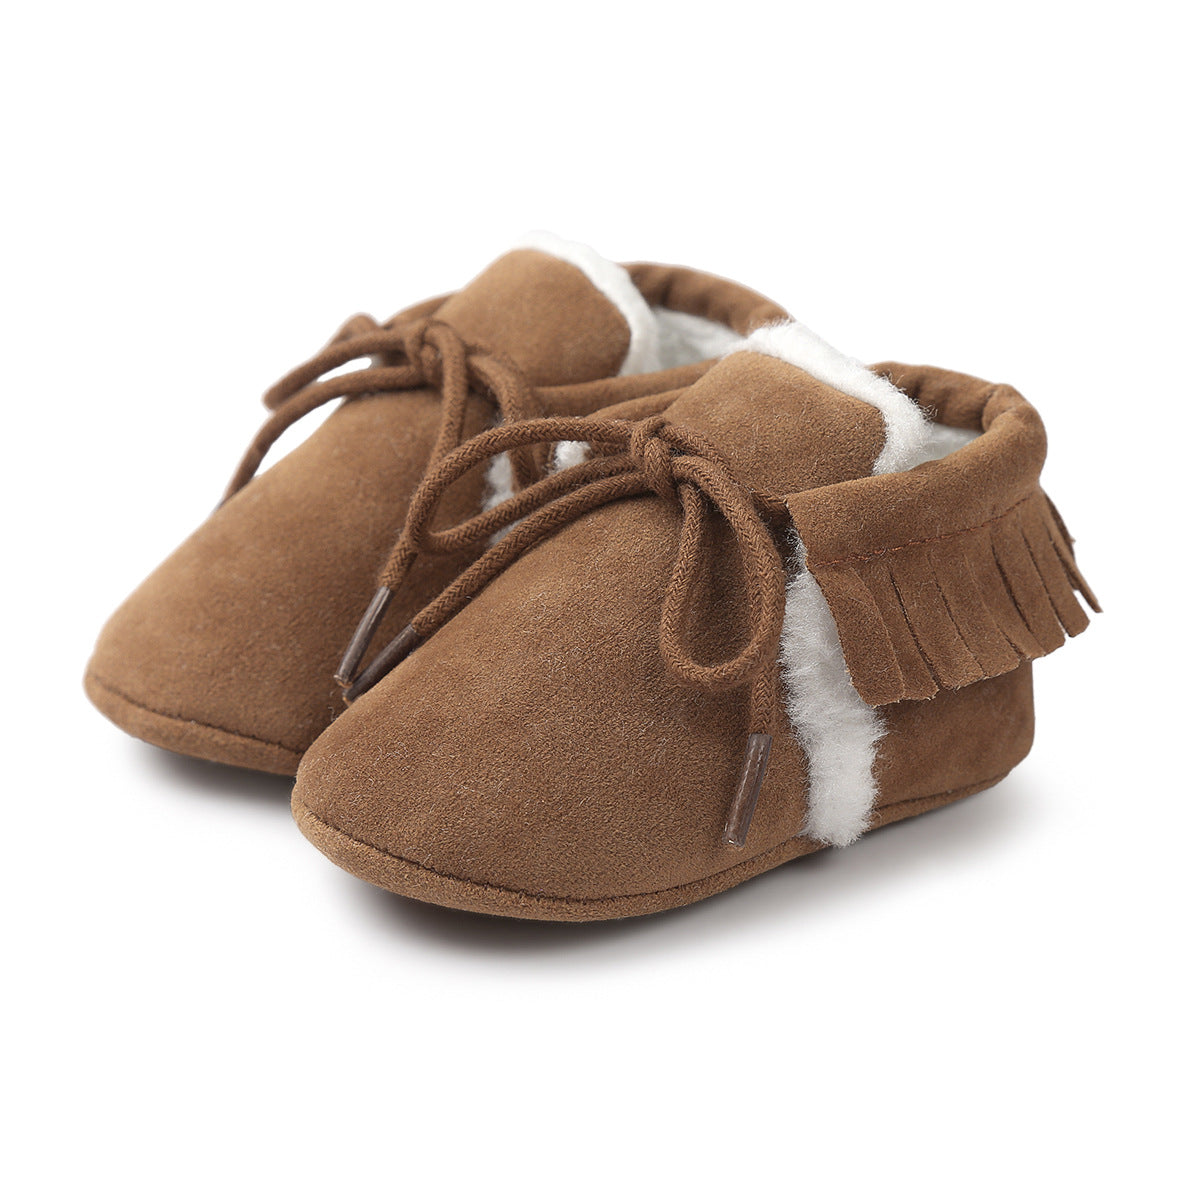 Baby Soft Moccasin Slippers - Slippers Galore